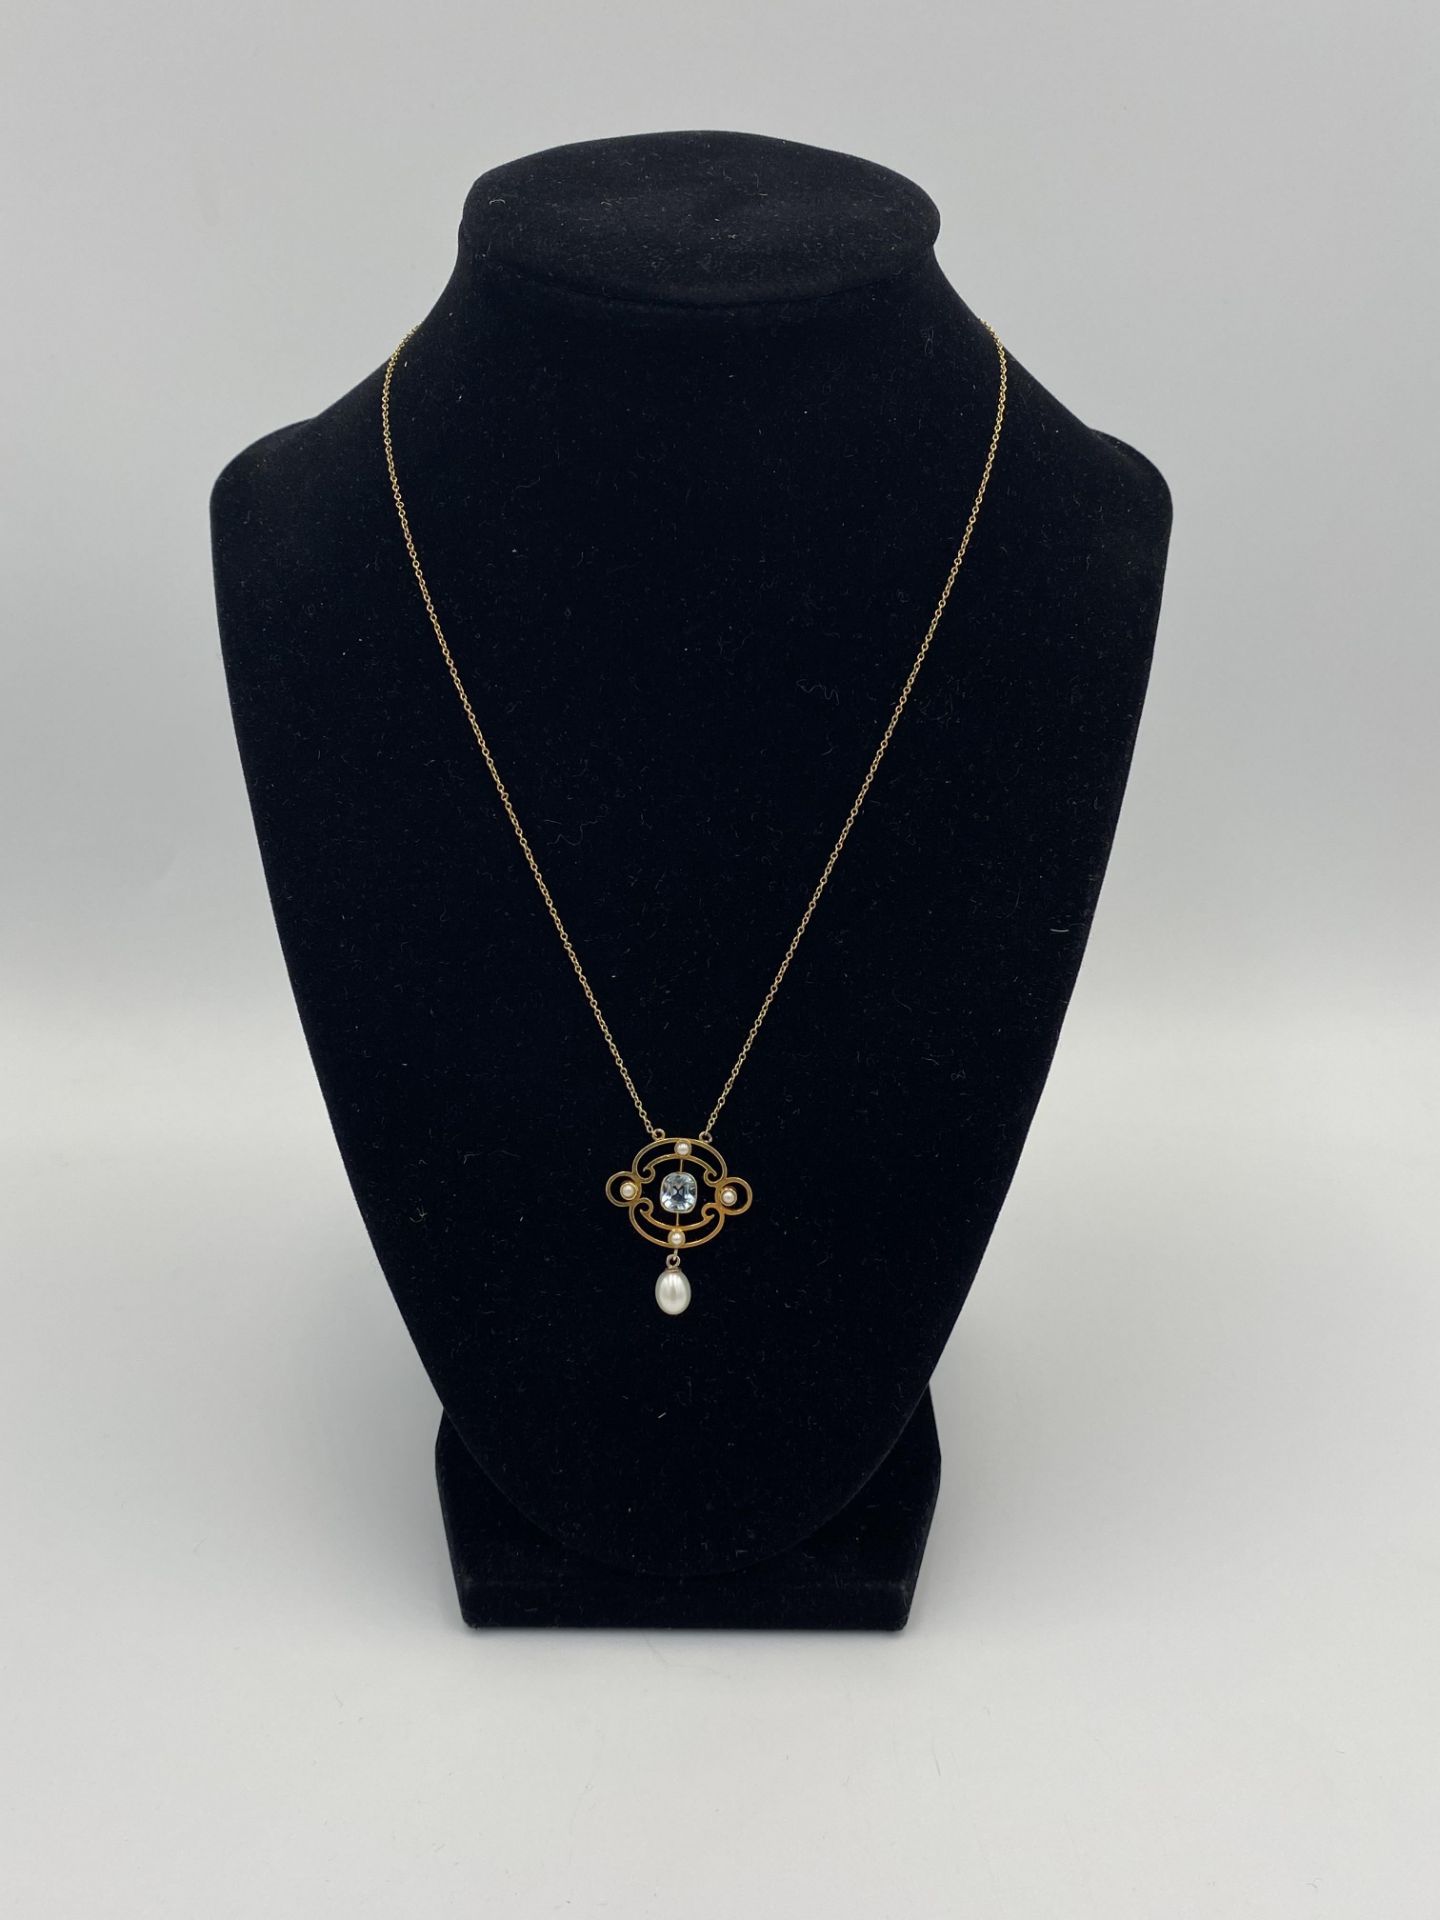 15ct gold pendant necklace - Image 3 of 4